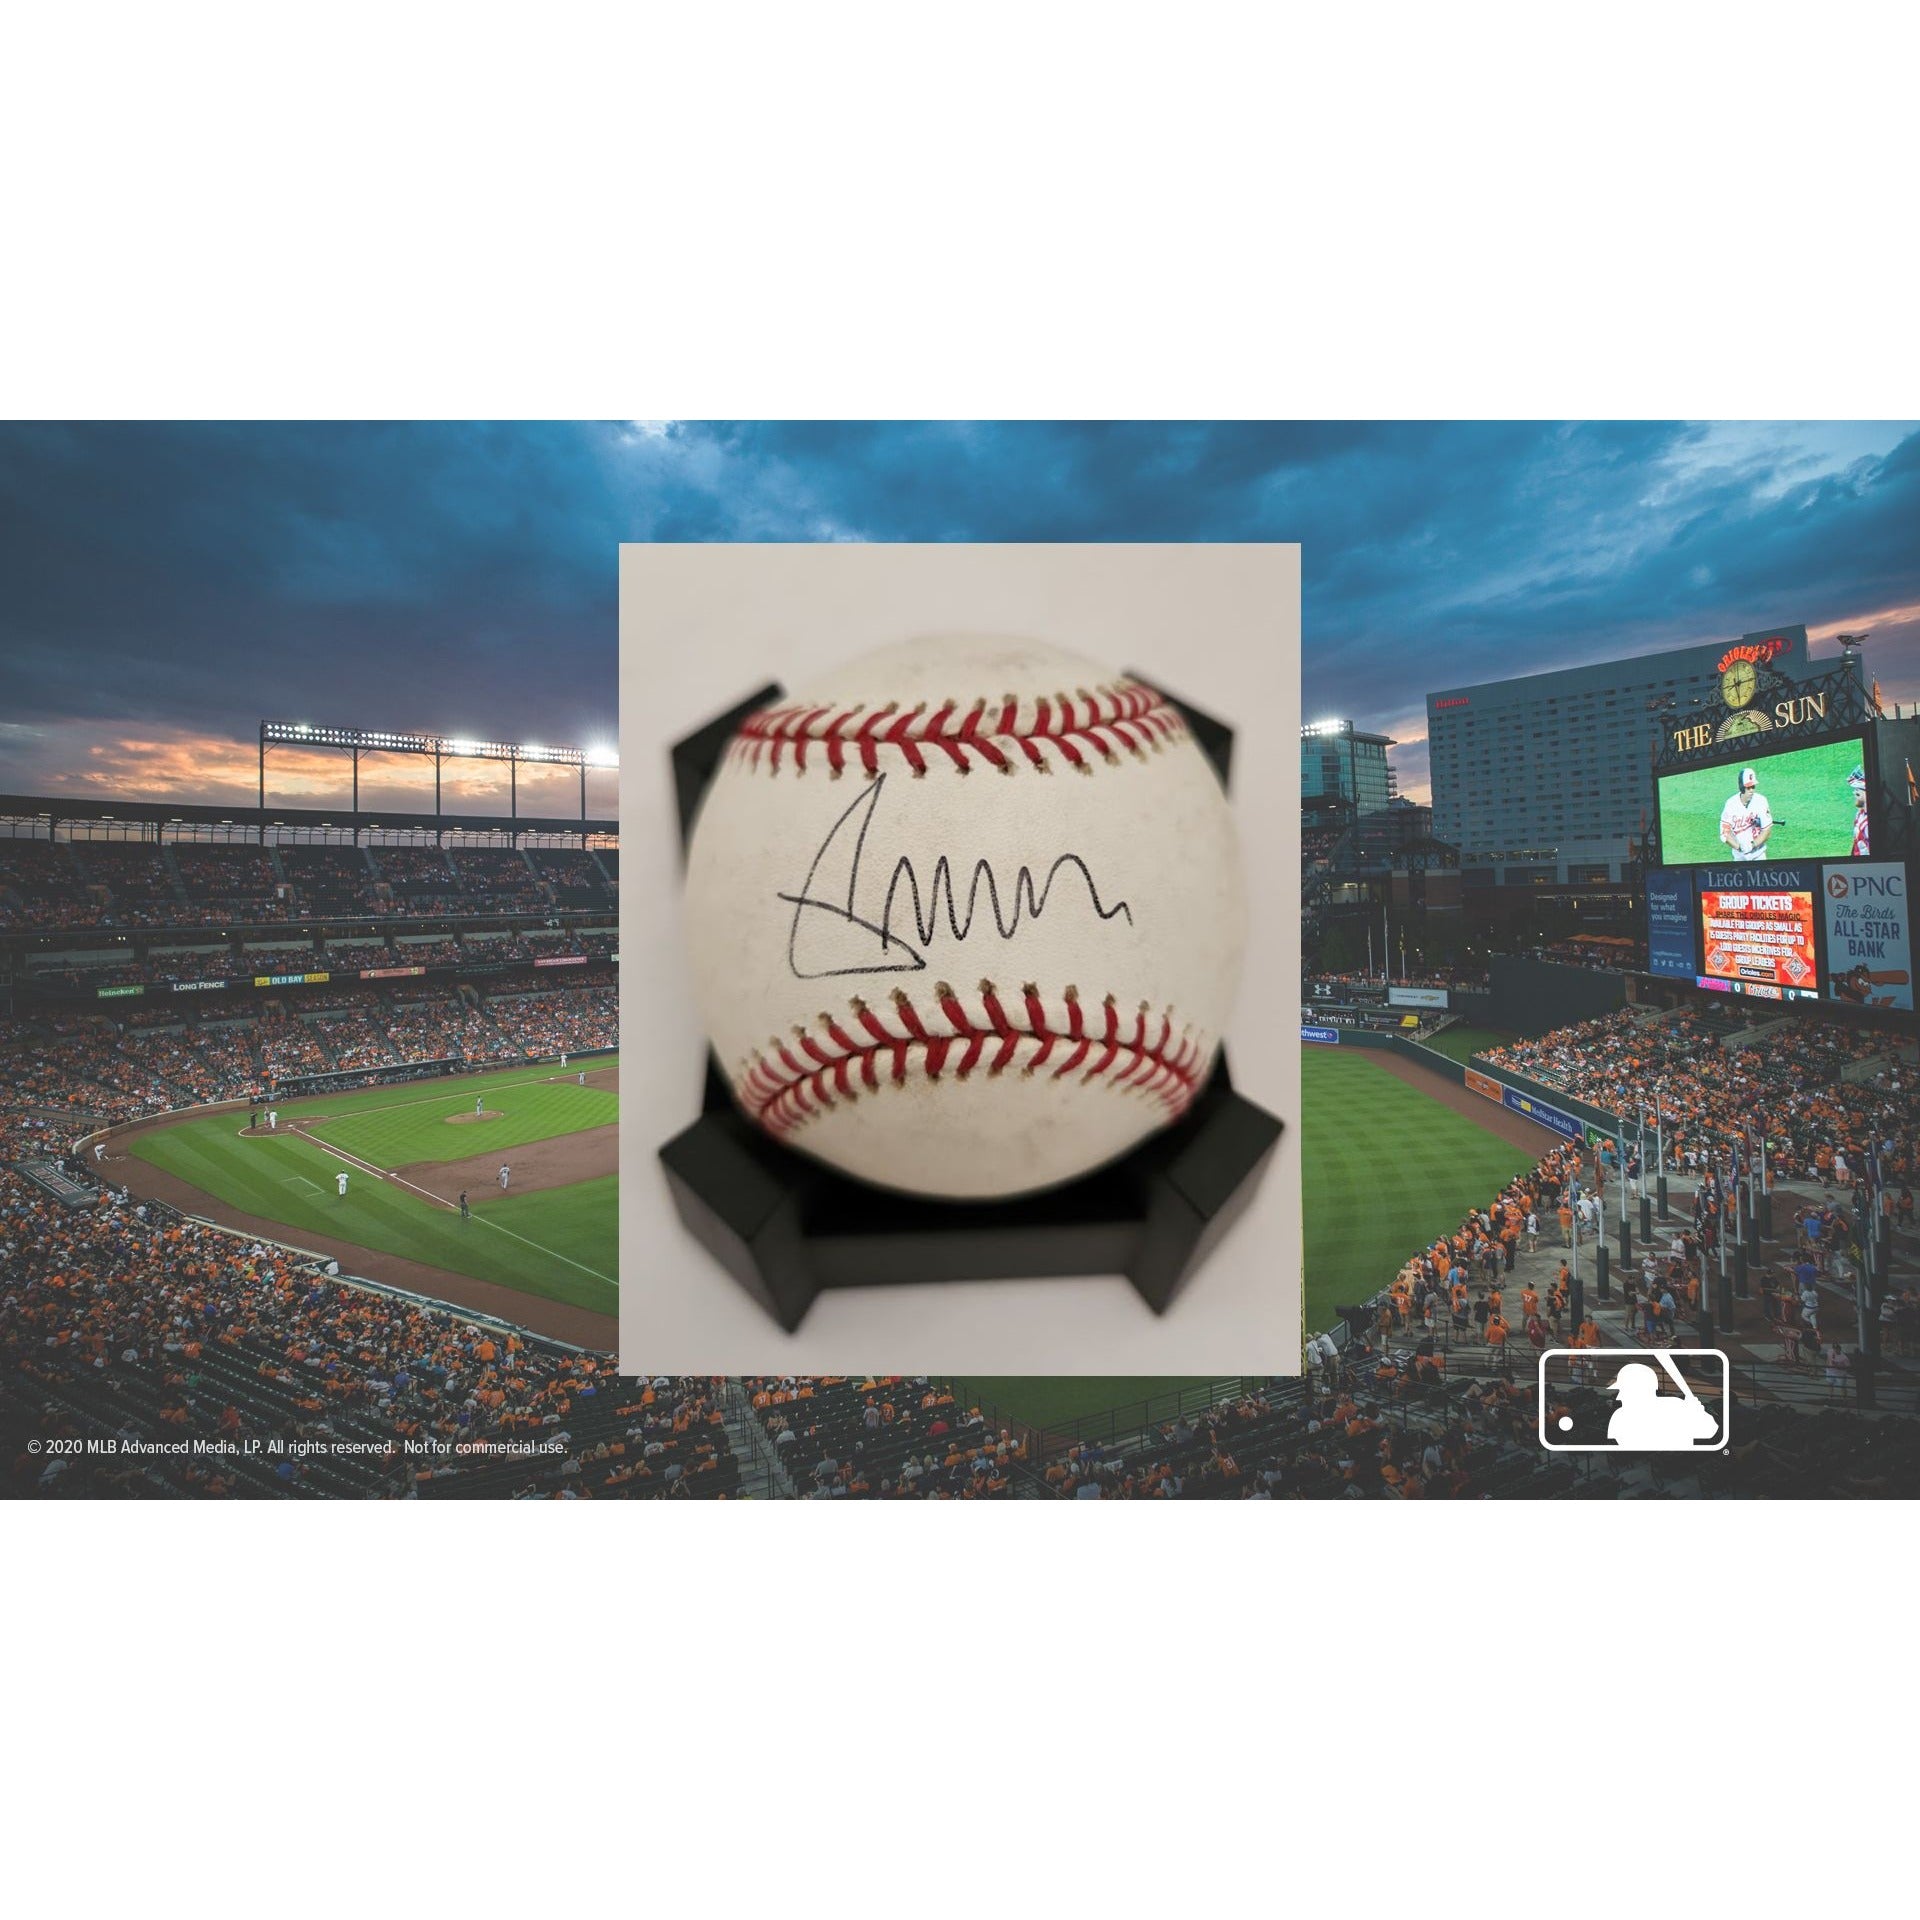 President Donald Trump Rawlings MLB baseball signed with proof